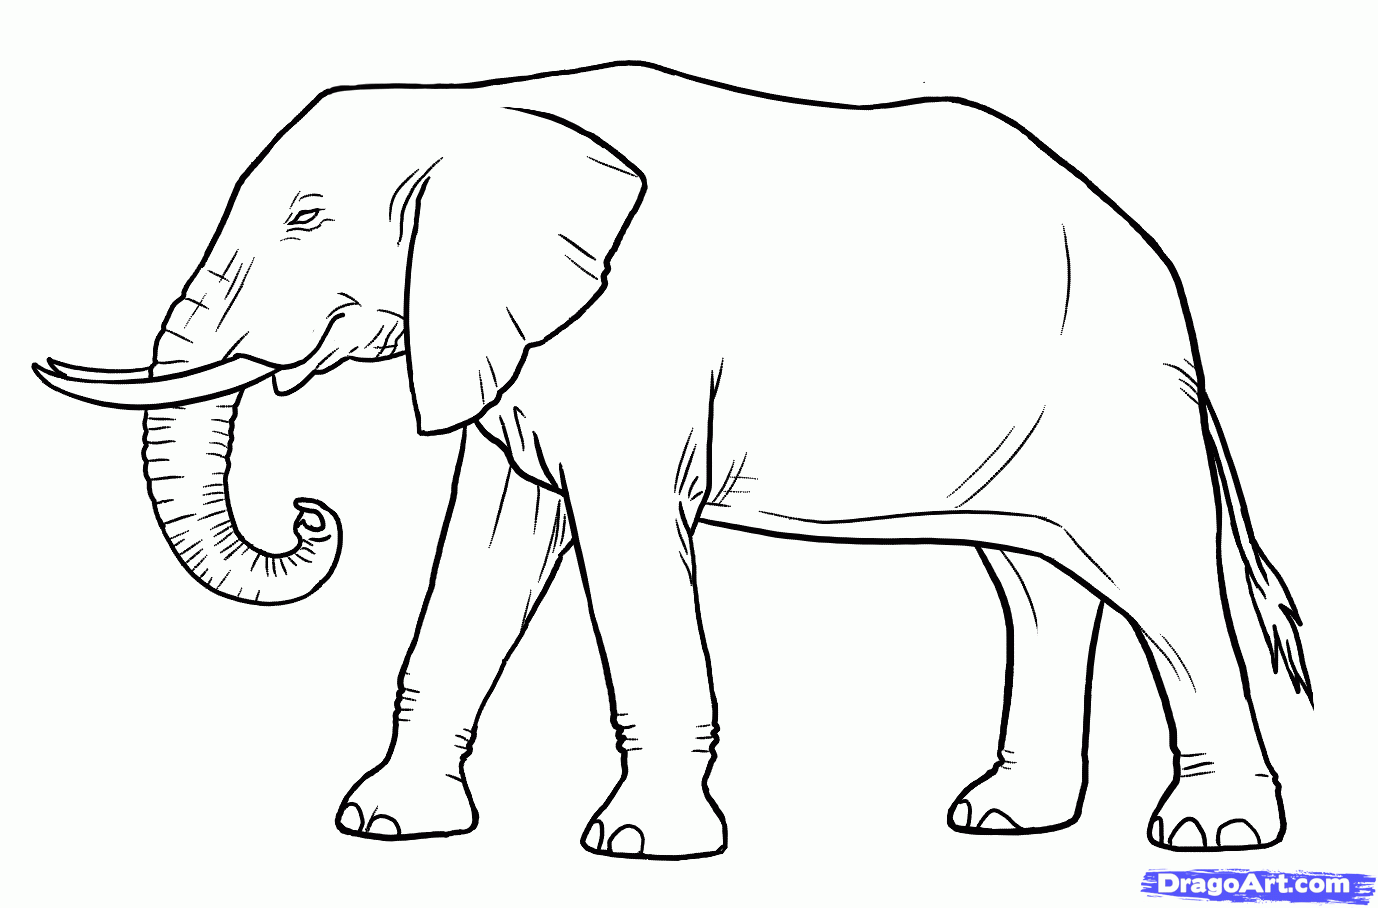 Free Elephant Drawing For Kids, Download Free Elephant Drawing For Kids ...